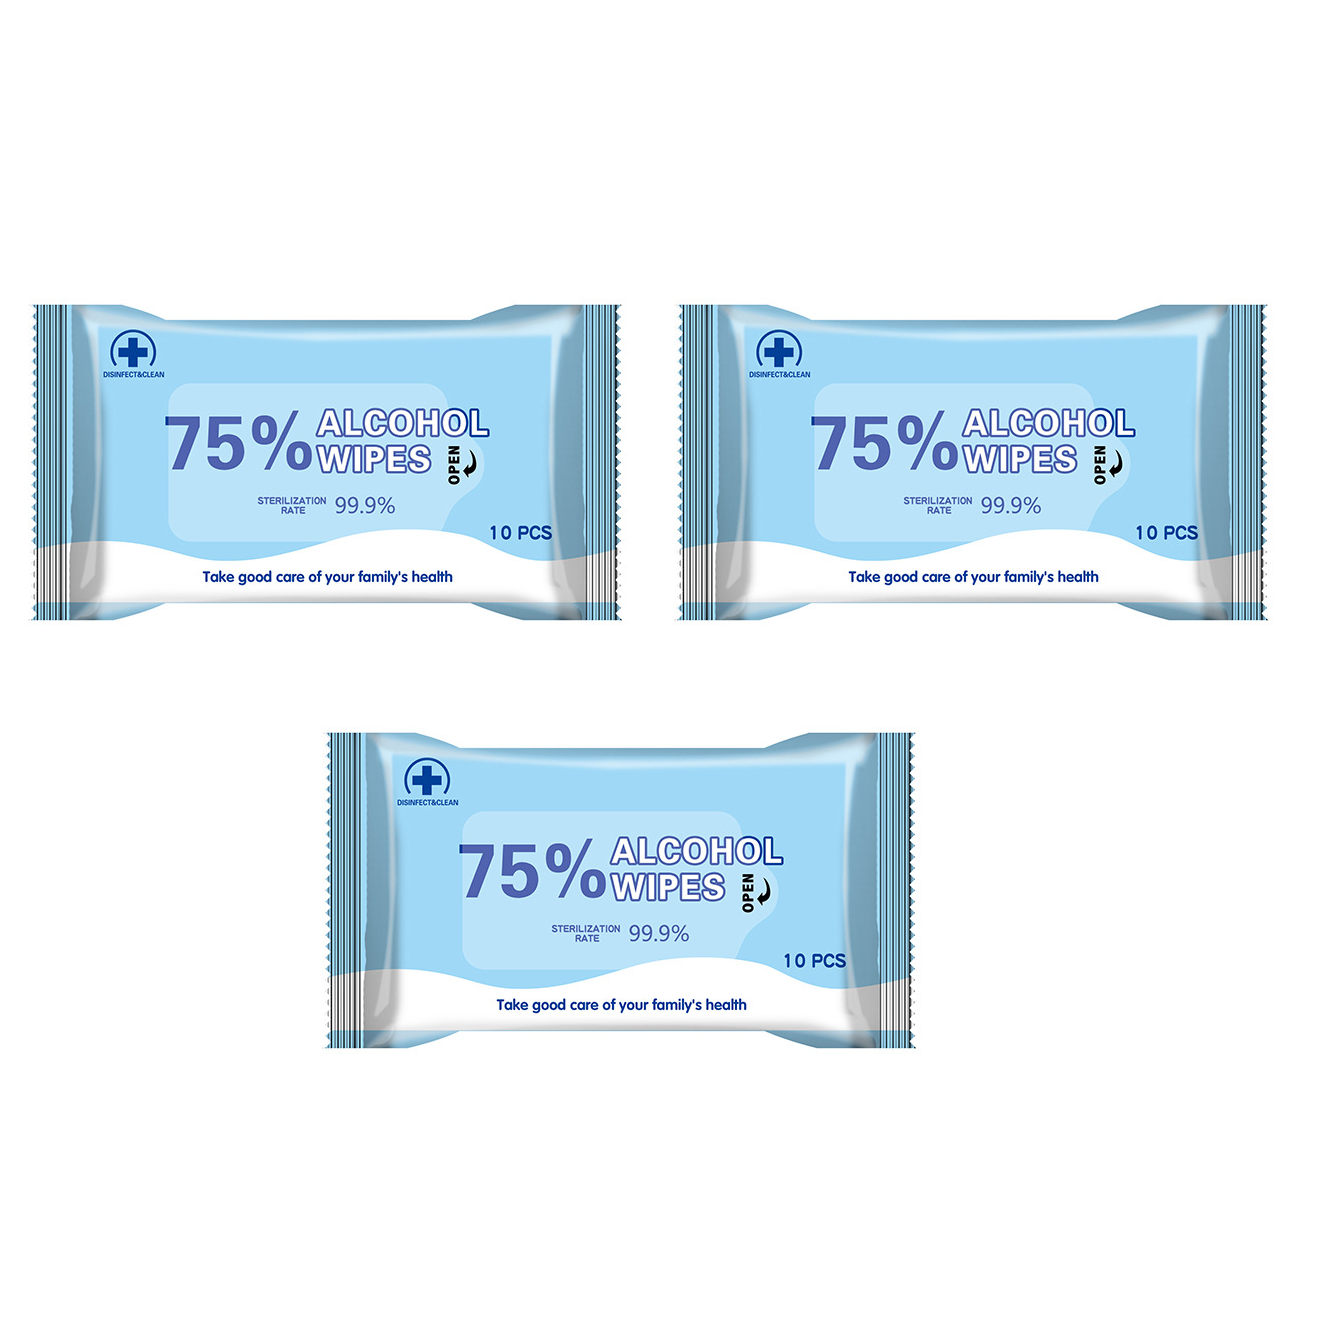 XINQING 3 Packs Of 10Pcs 75% Medical Alcohol Wipes 99.9% Antibacterial Disinfection Cleaning Wet Wipes Disposable Wipes